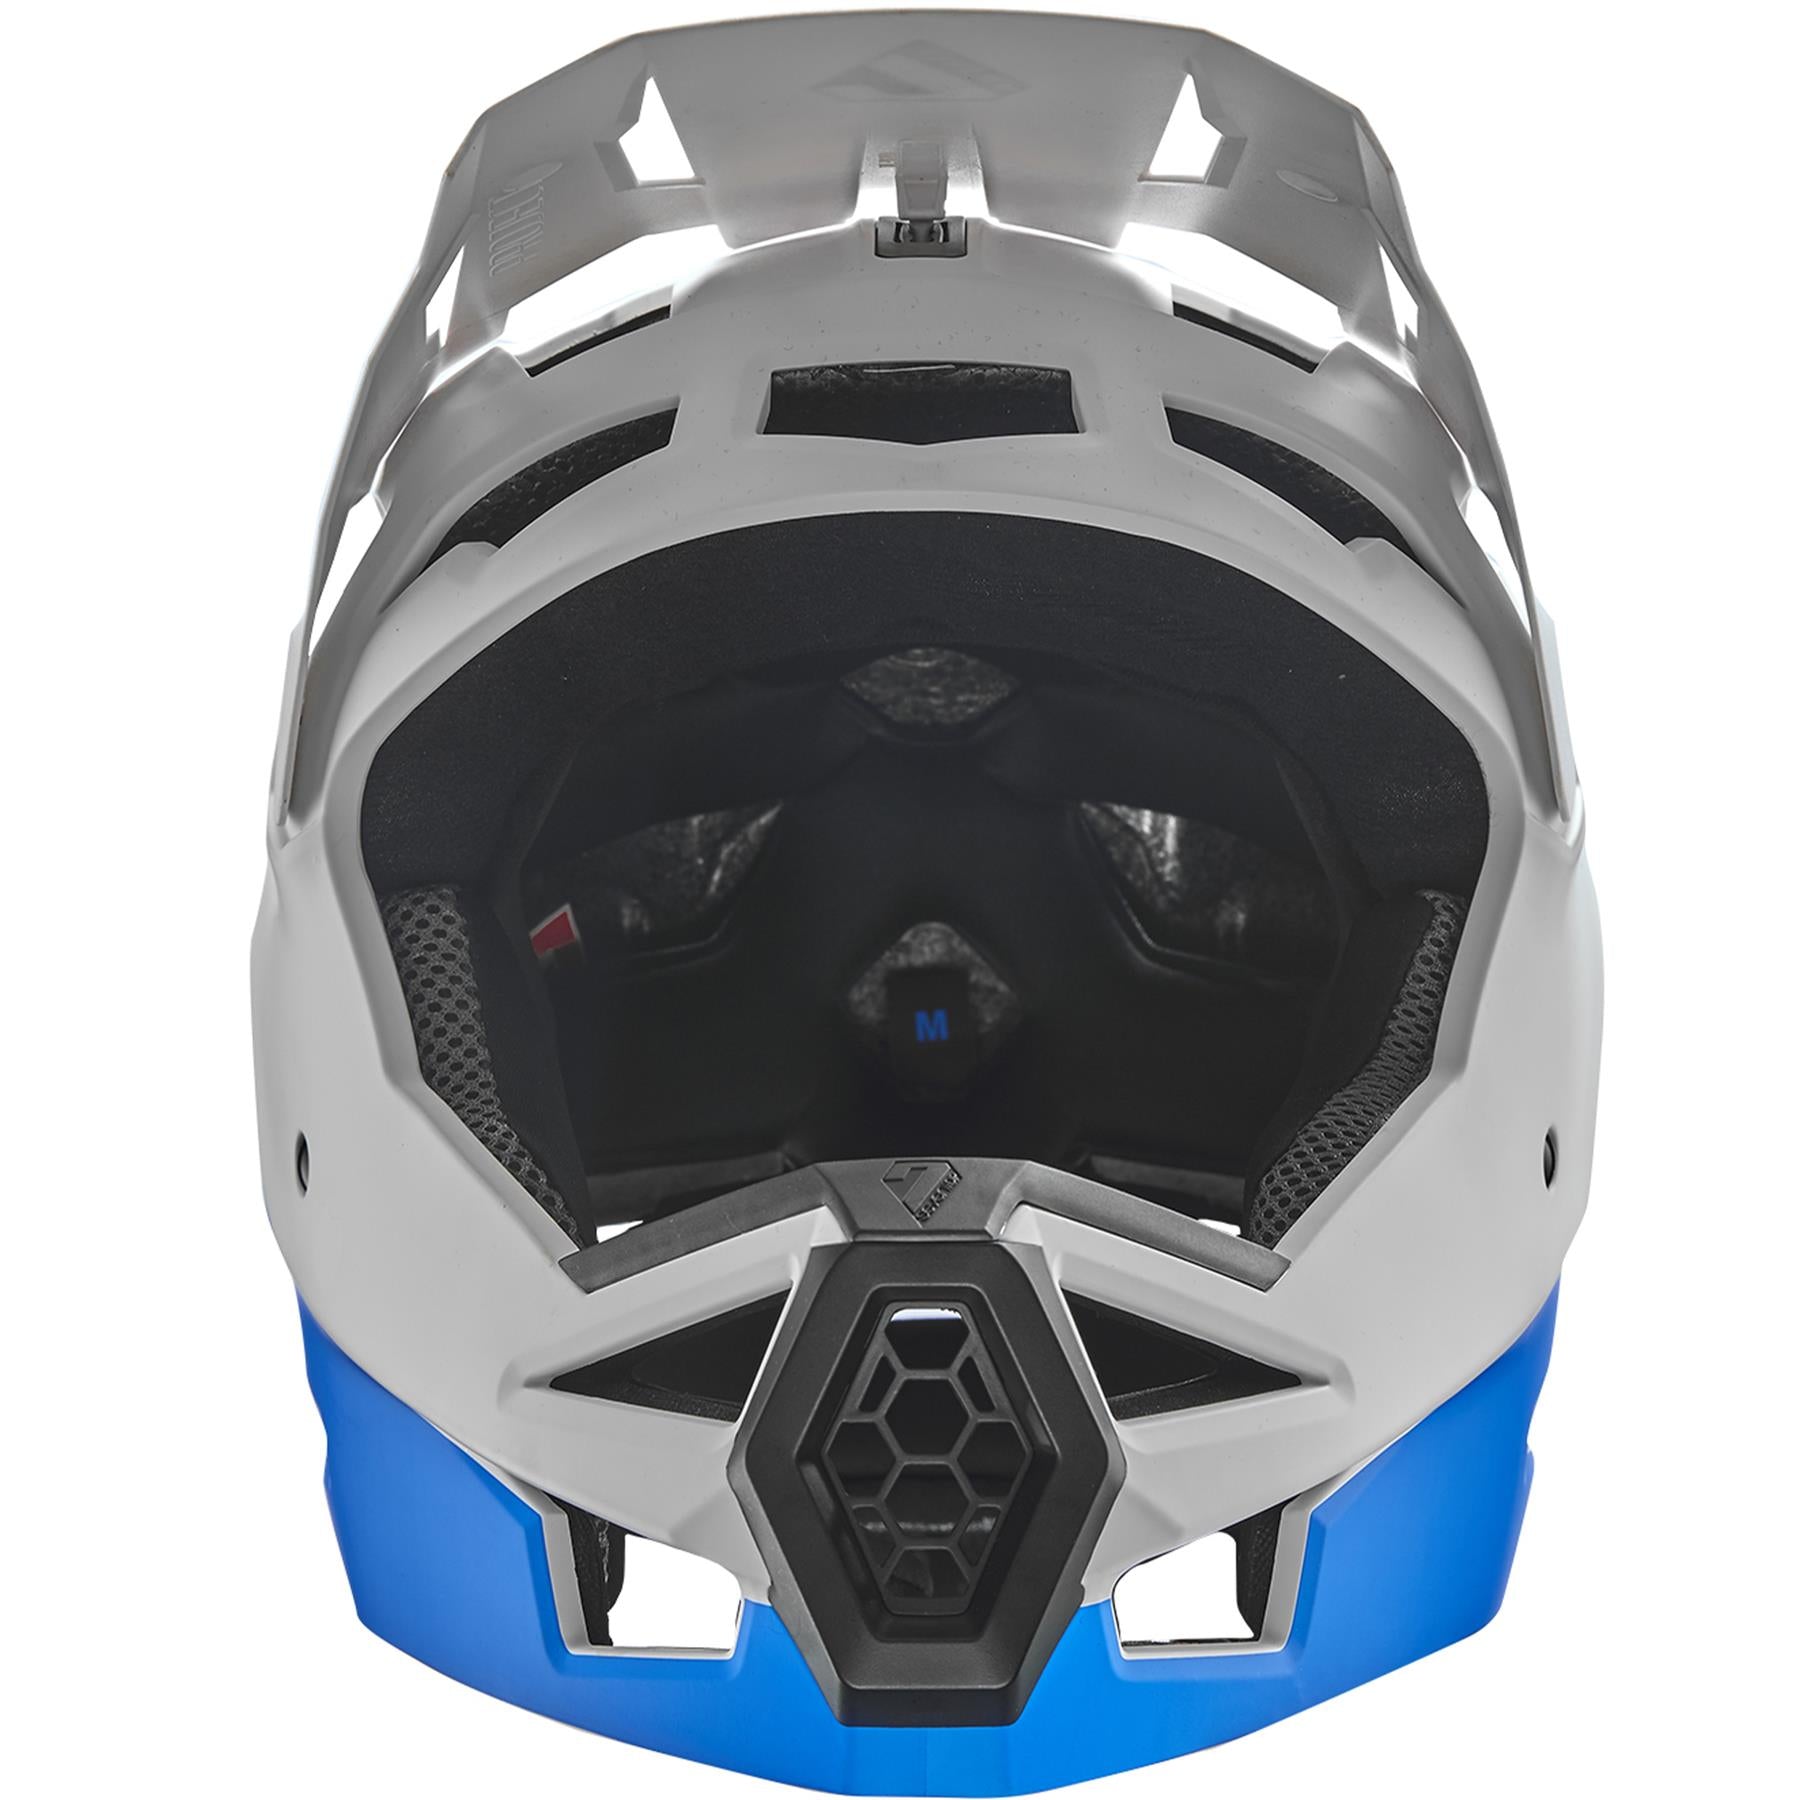 Seven iDP Project 23 ABS Race Helm - White/Blue